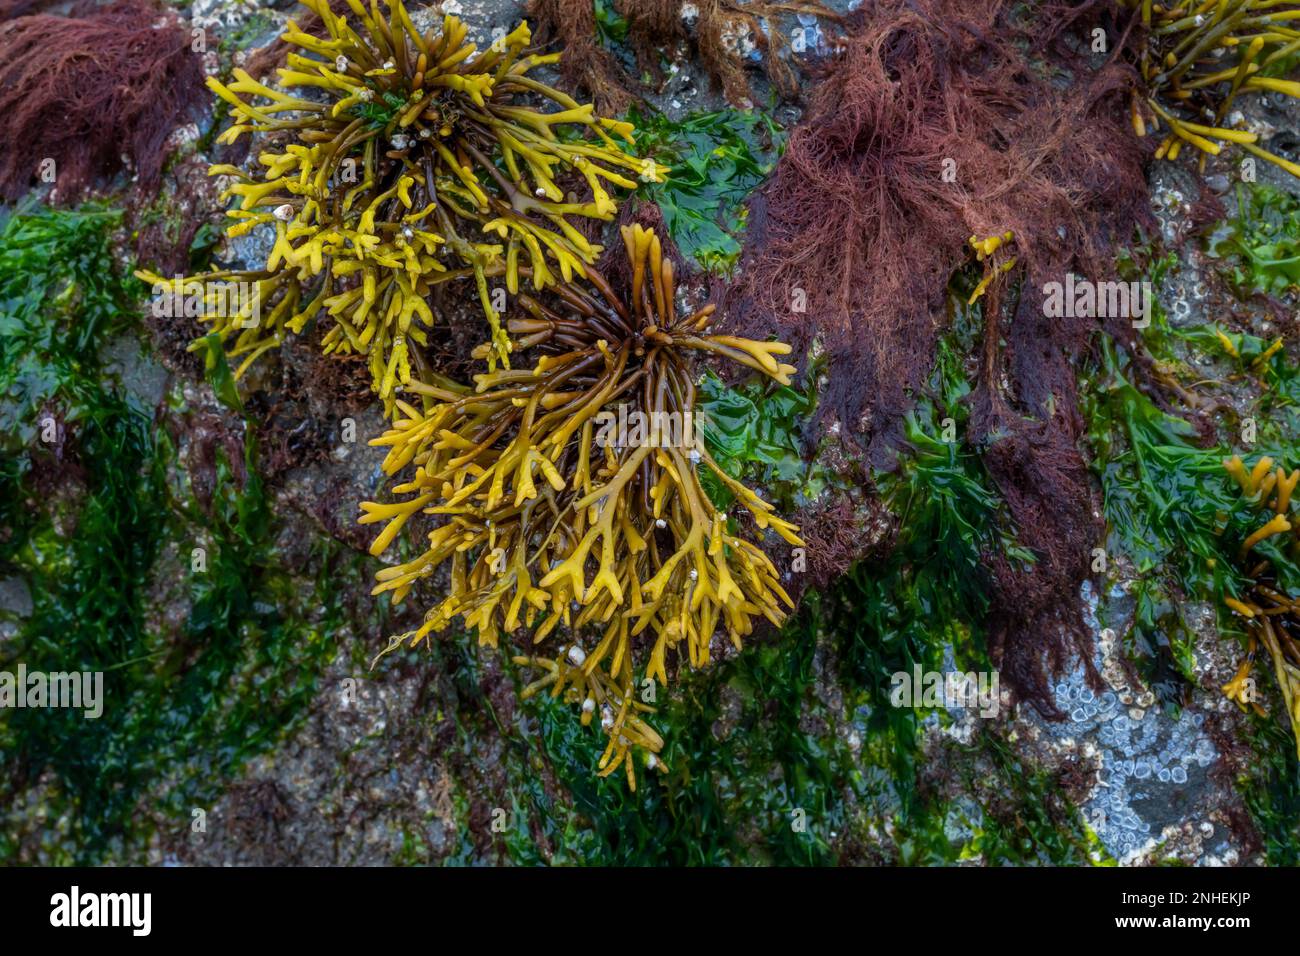 Rockweed, Fucus gardneri, with other kelp species at Point of Arches  in Olympic National Park, Washington State, USA Stock Photo